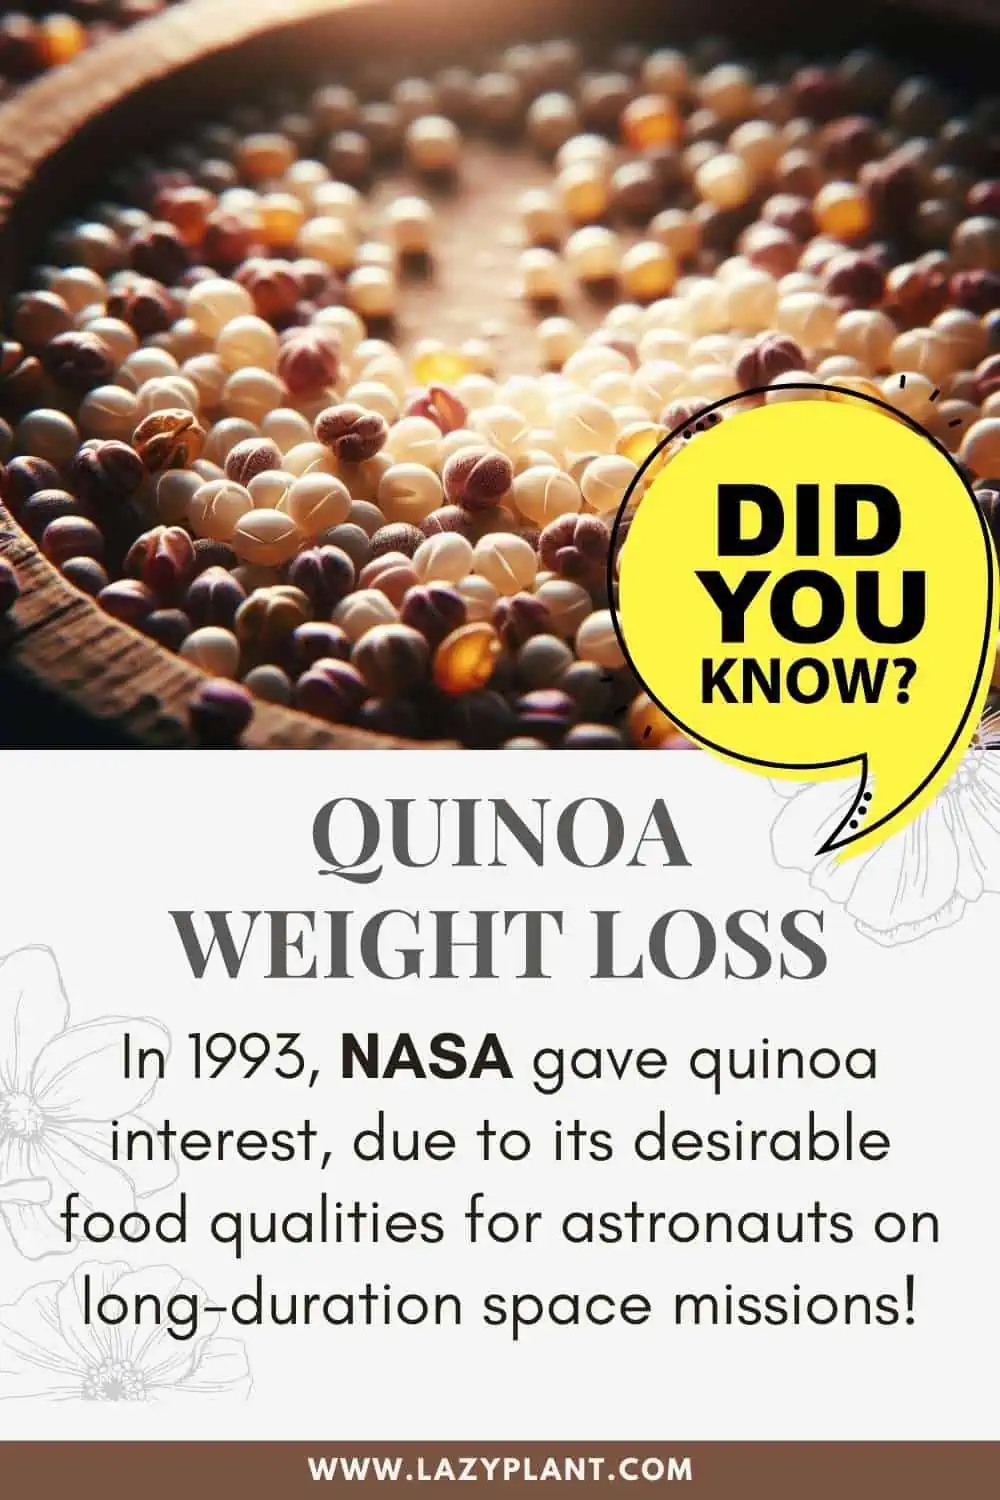 NASA gave quinoa interest, due to its desirable food qualities for astronauts on long-duration space missions!